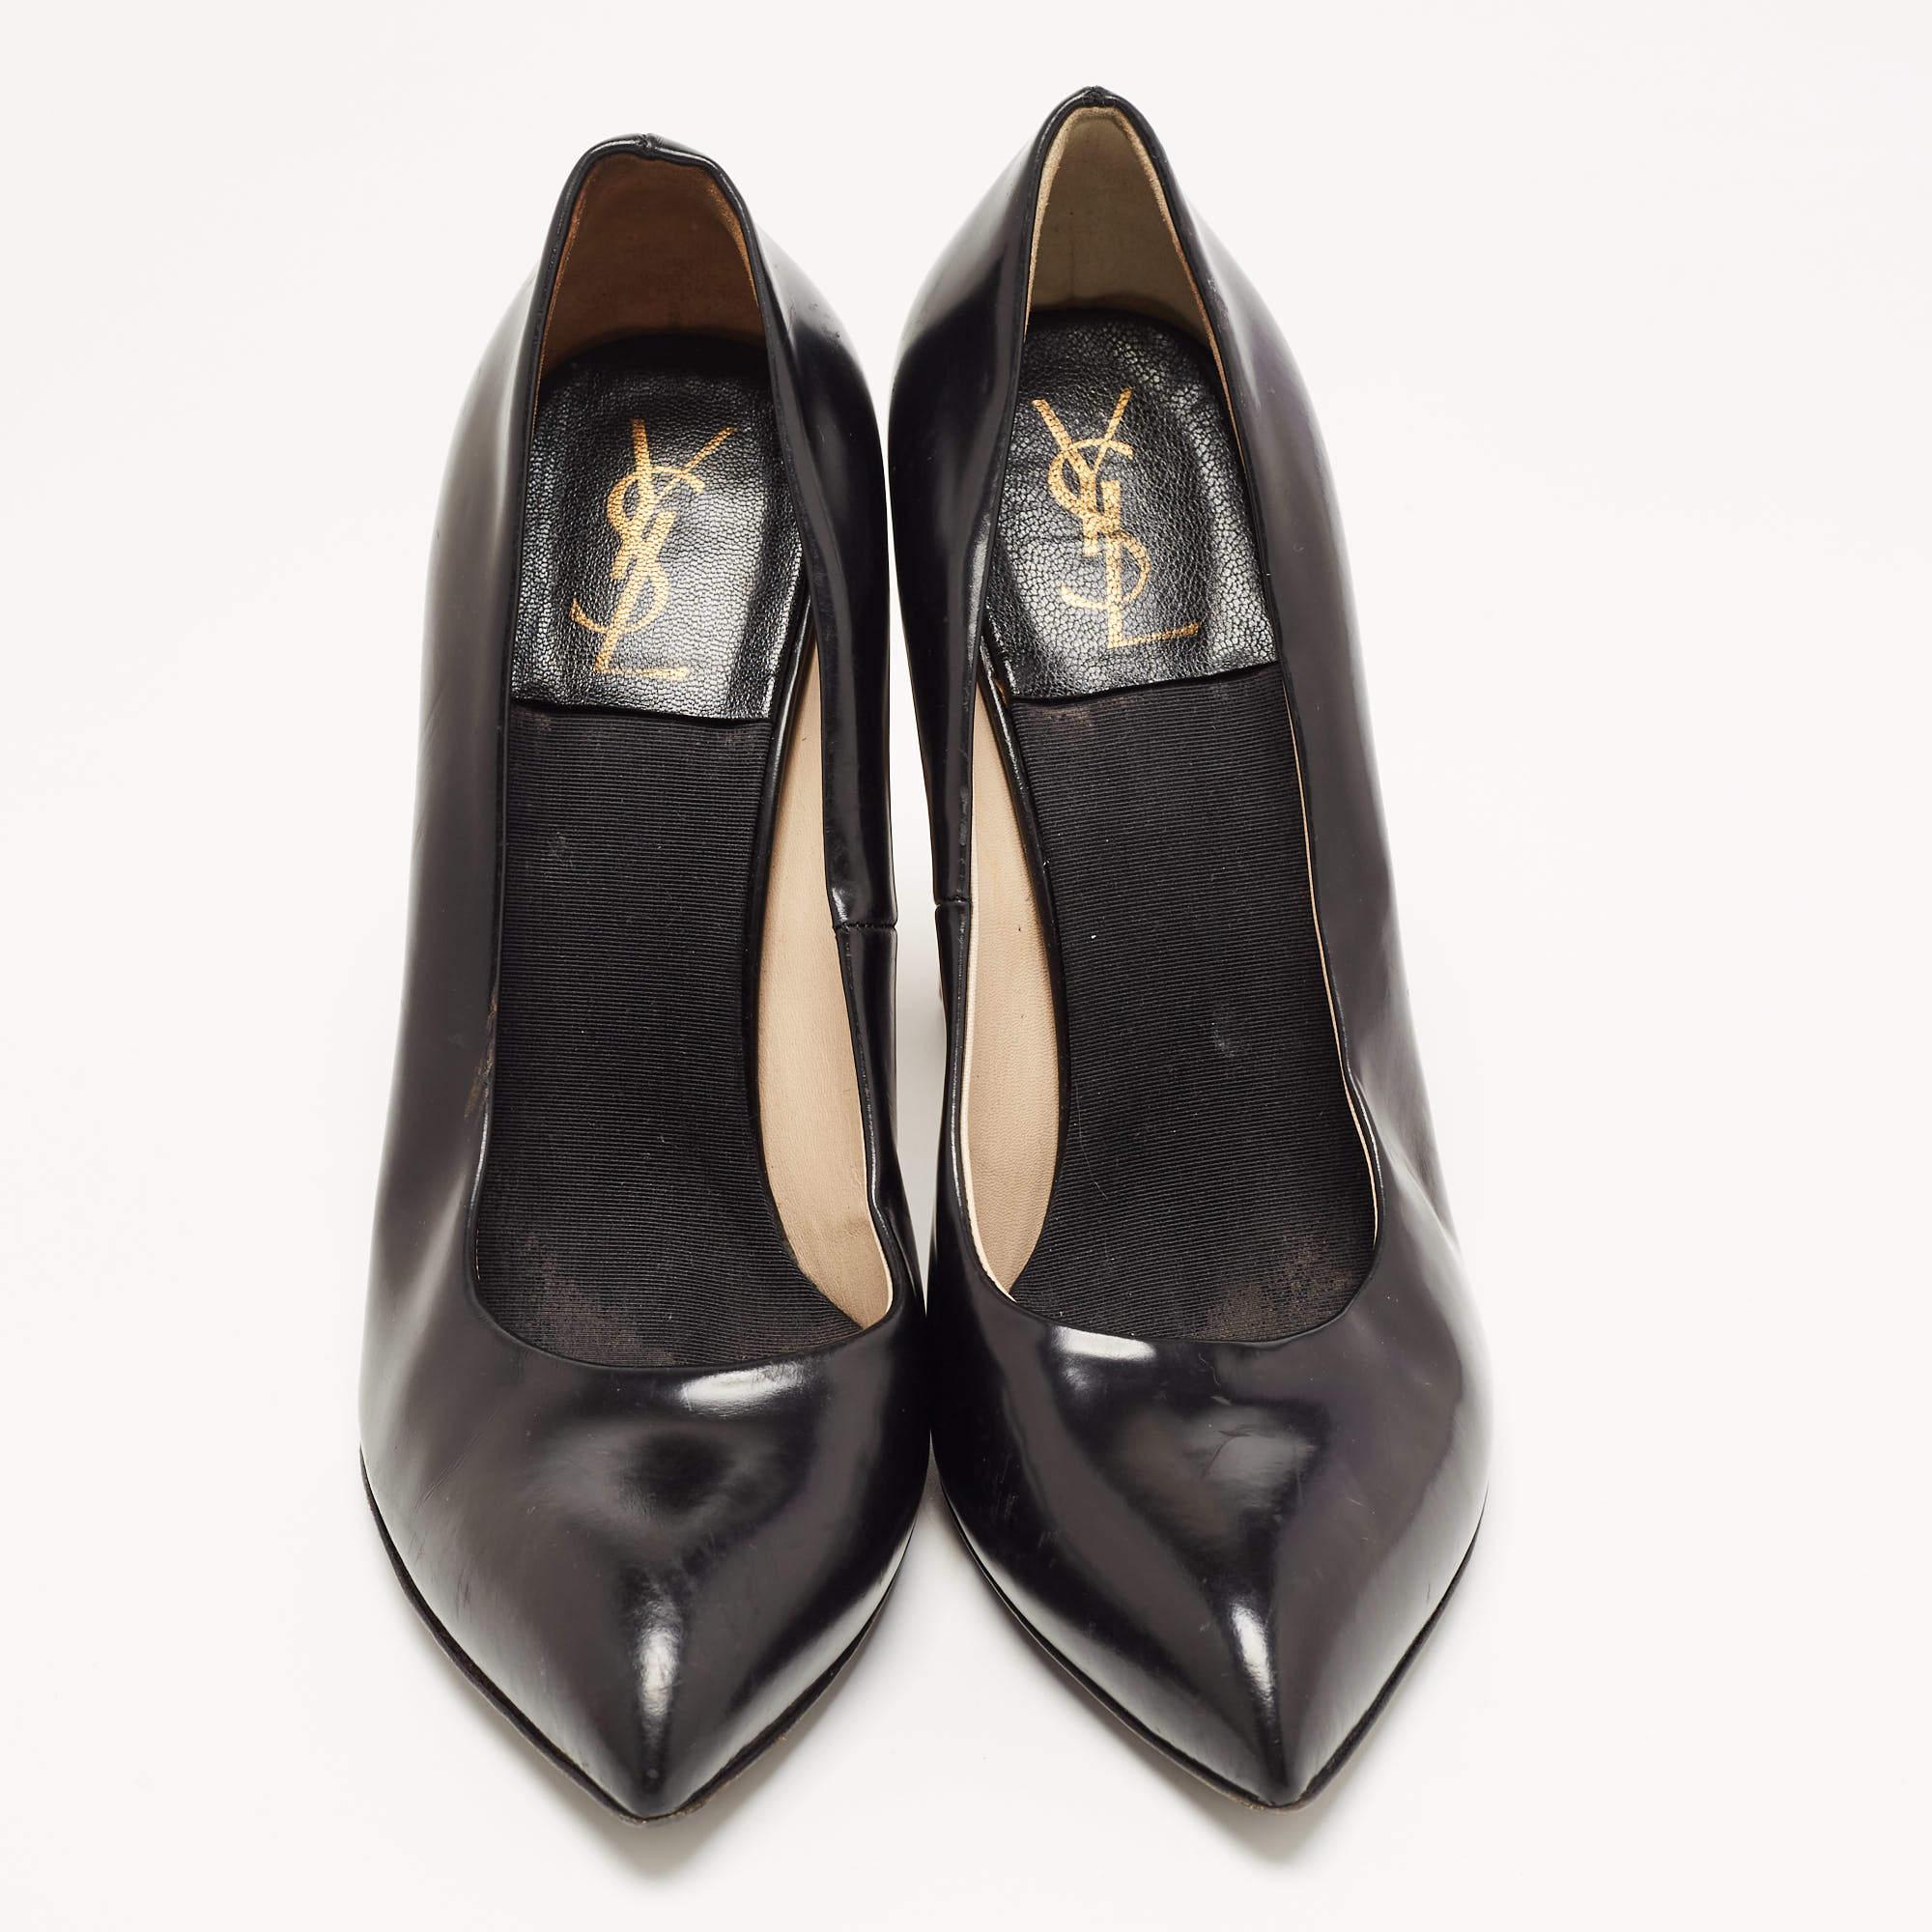 Make a statement with these Yves Saint Laurent pumps for women. Impeccably crafted, these chic heels offer both fashion and comfort, elevating your look with each graceful step.

